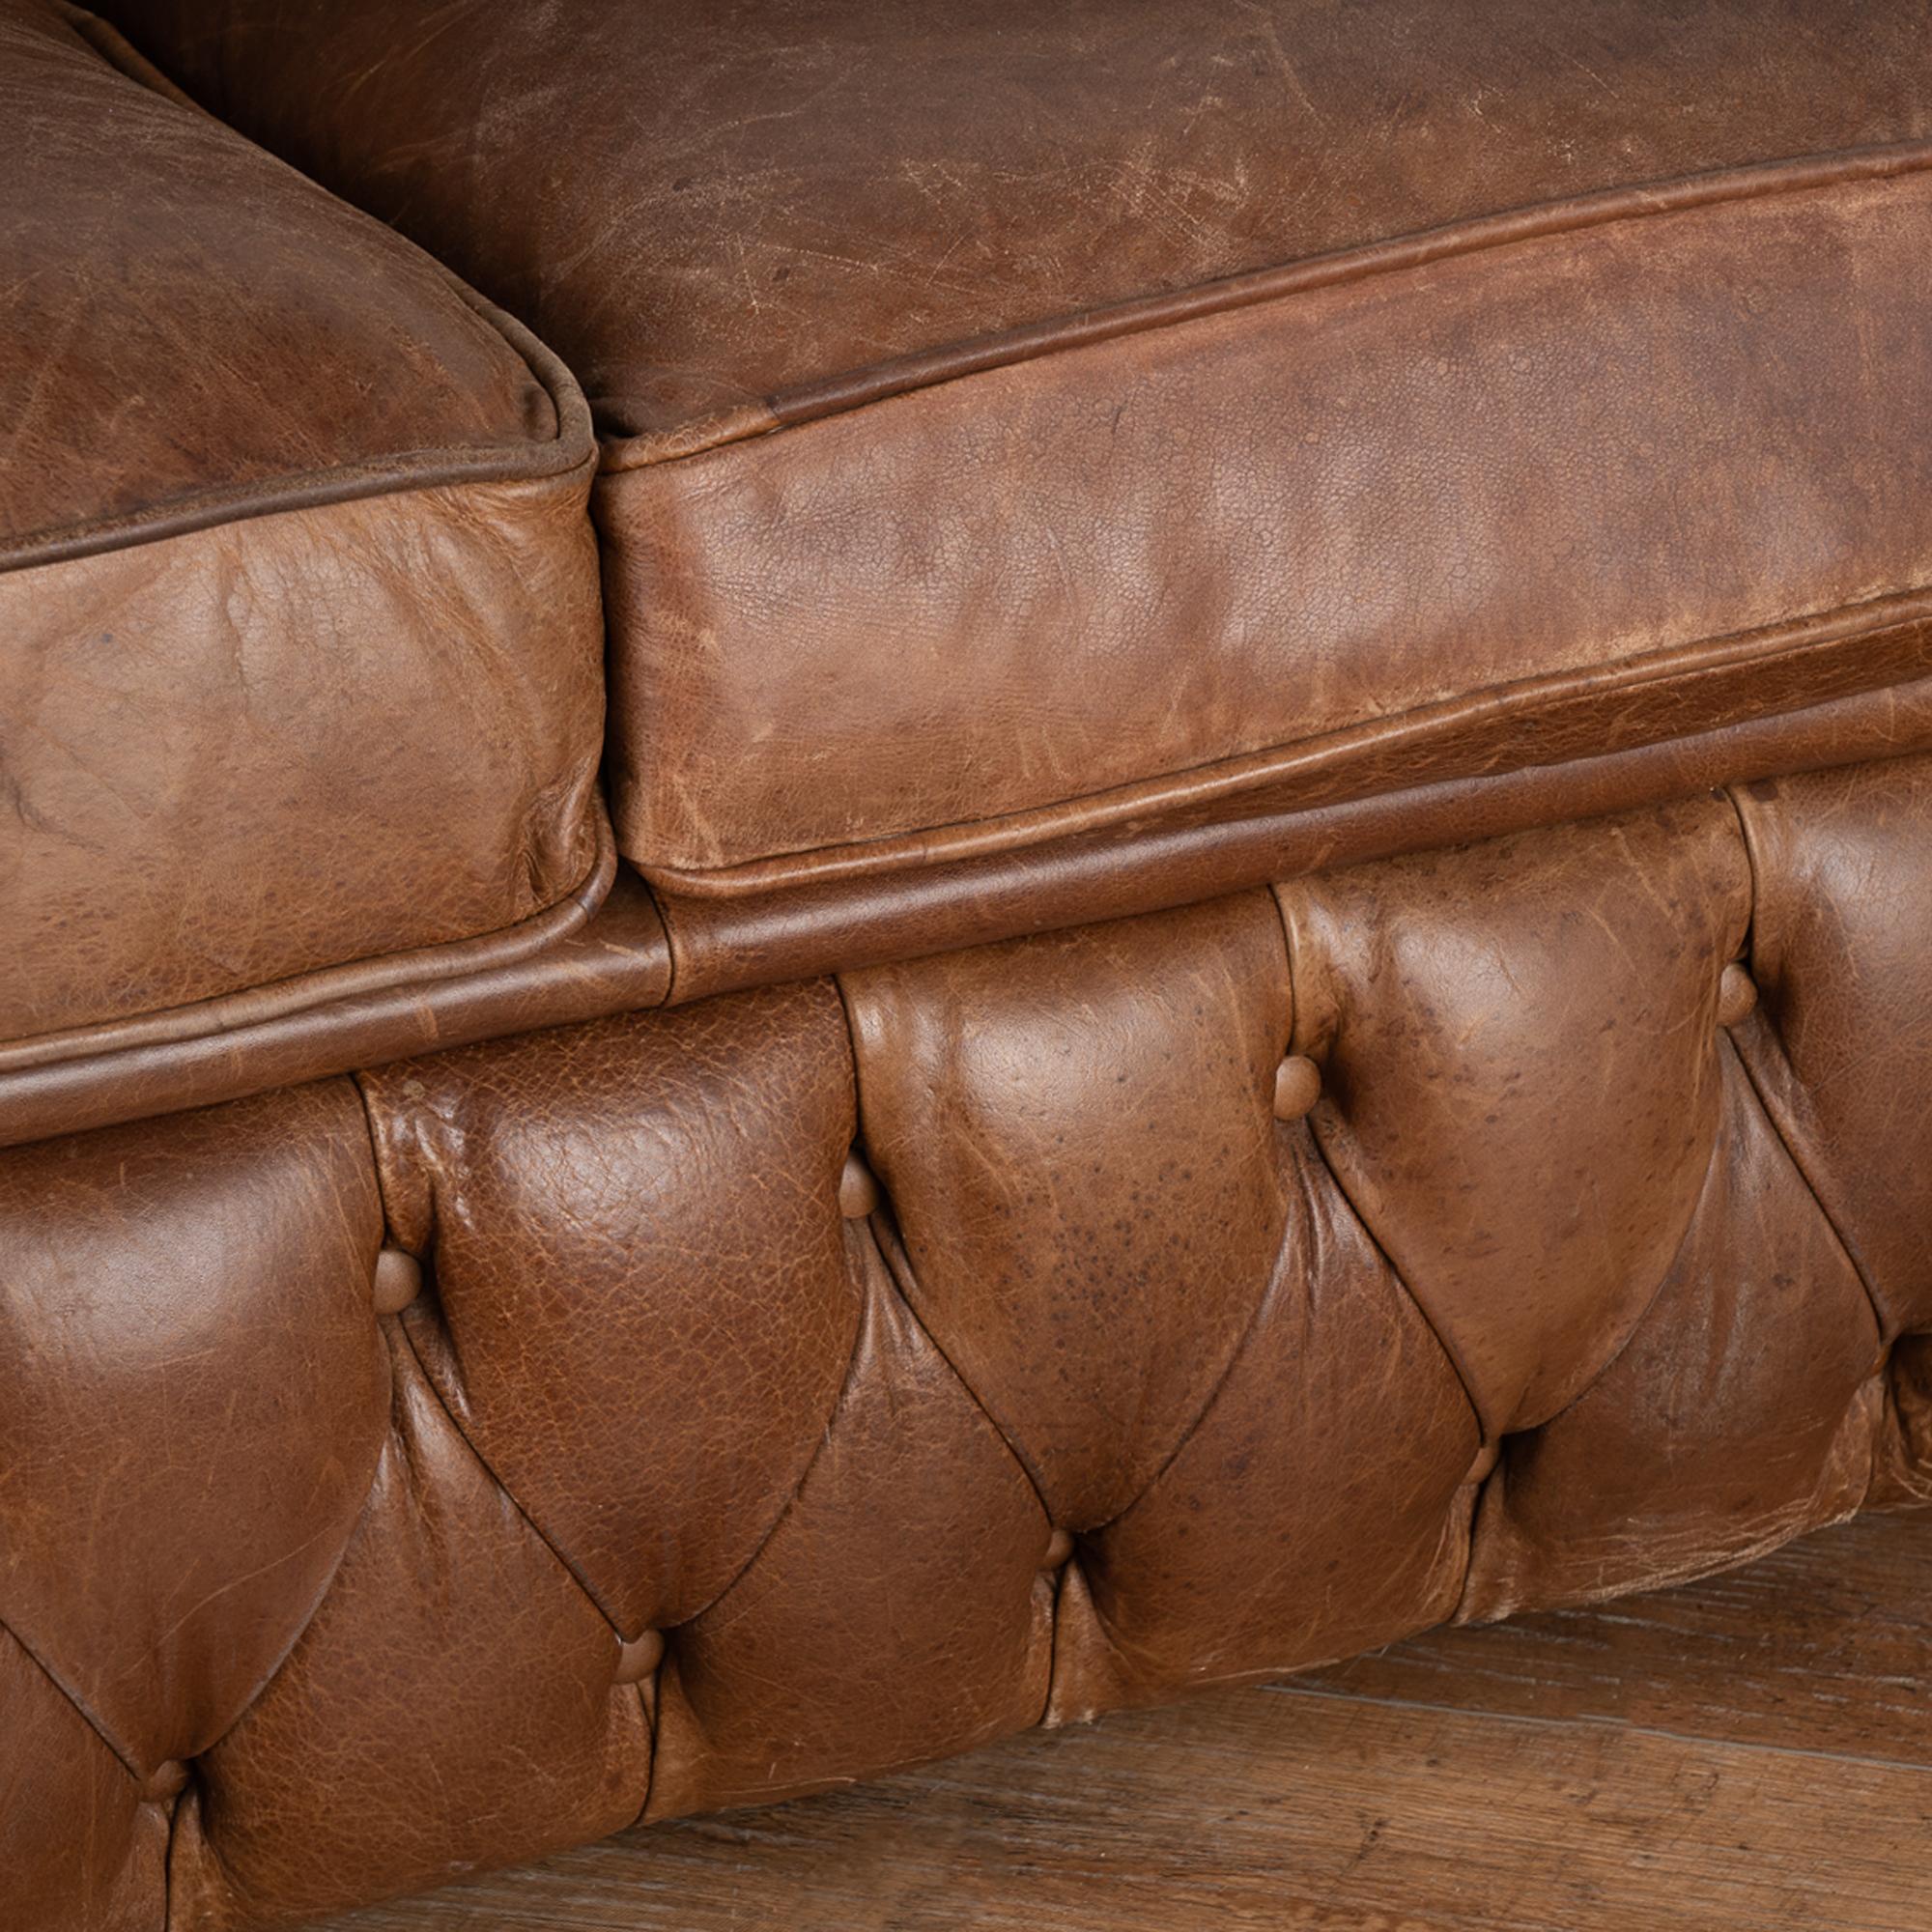 Vintage Brown Leather Three Seat Chesterfield Sofa, Denmark circa 1960-70 For Sale 3